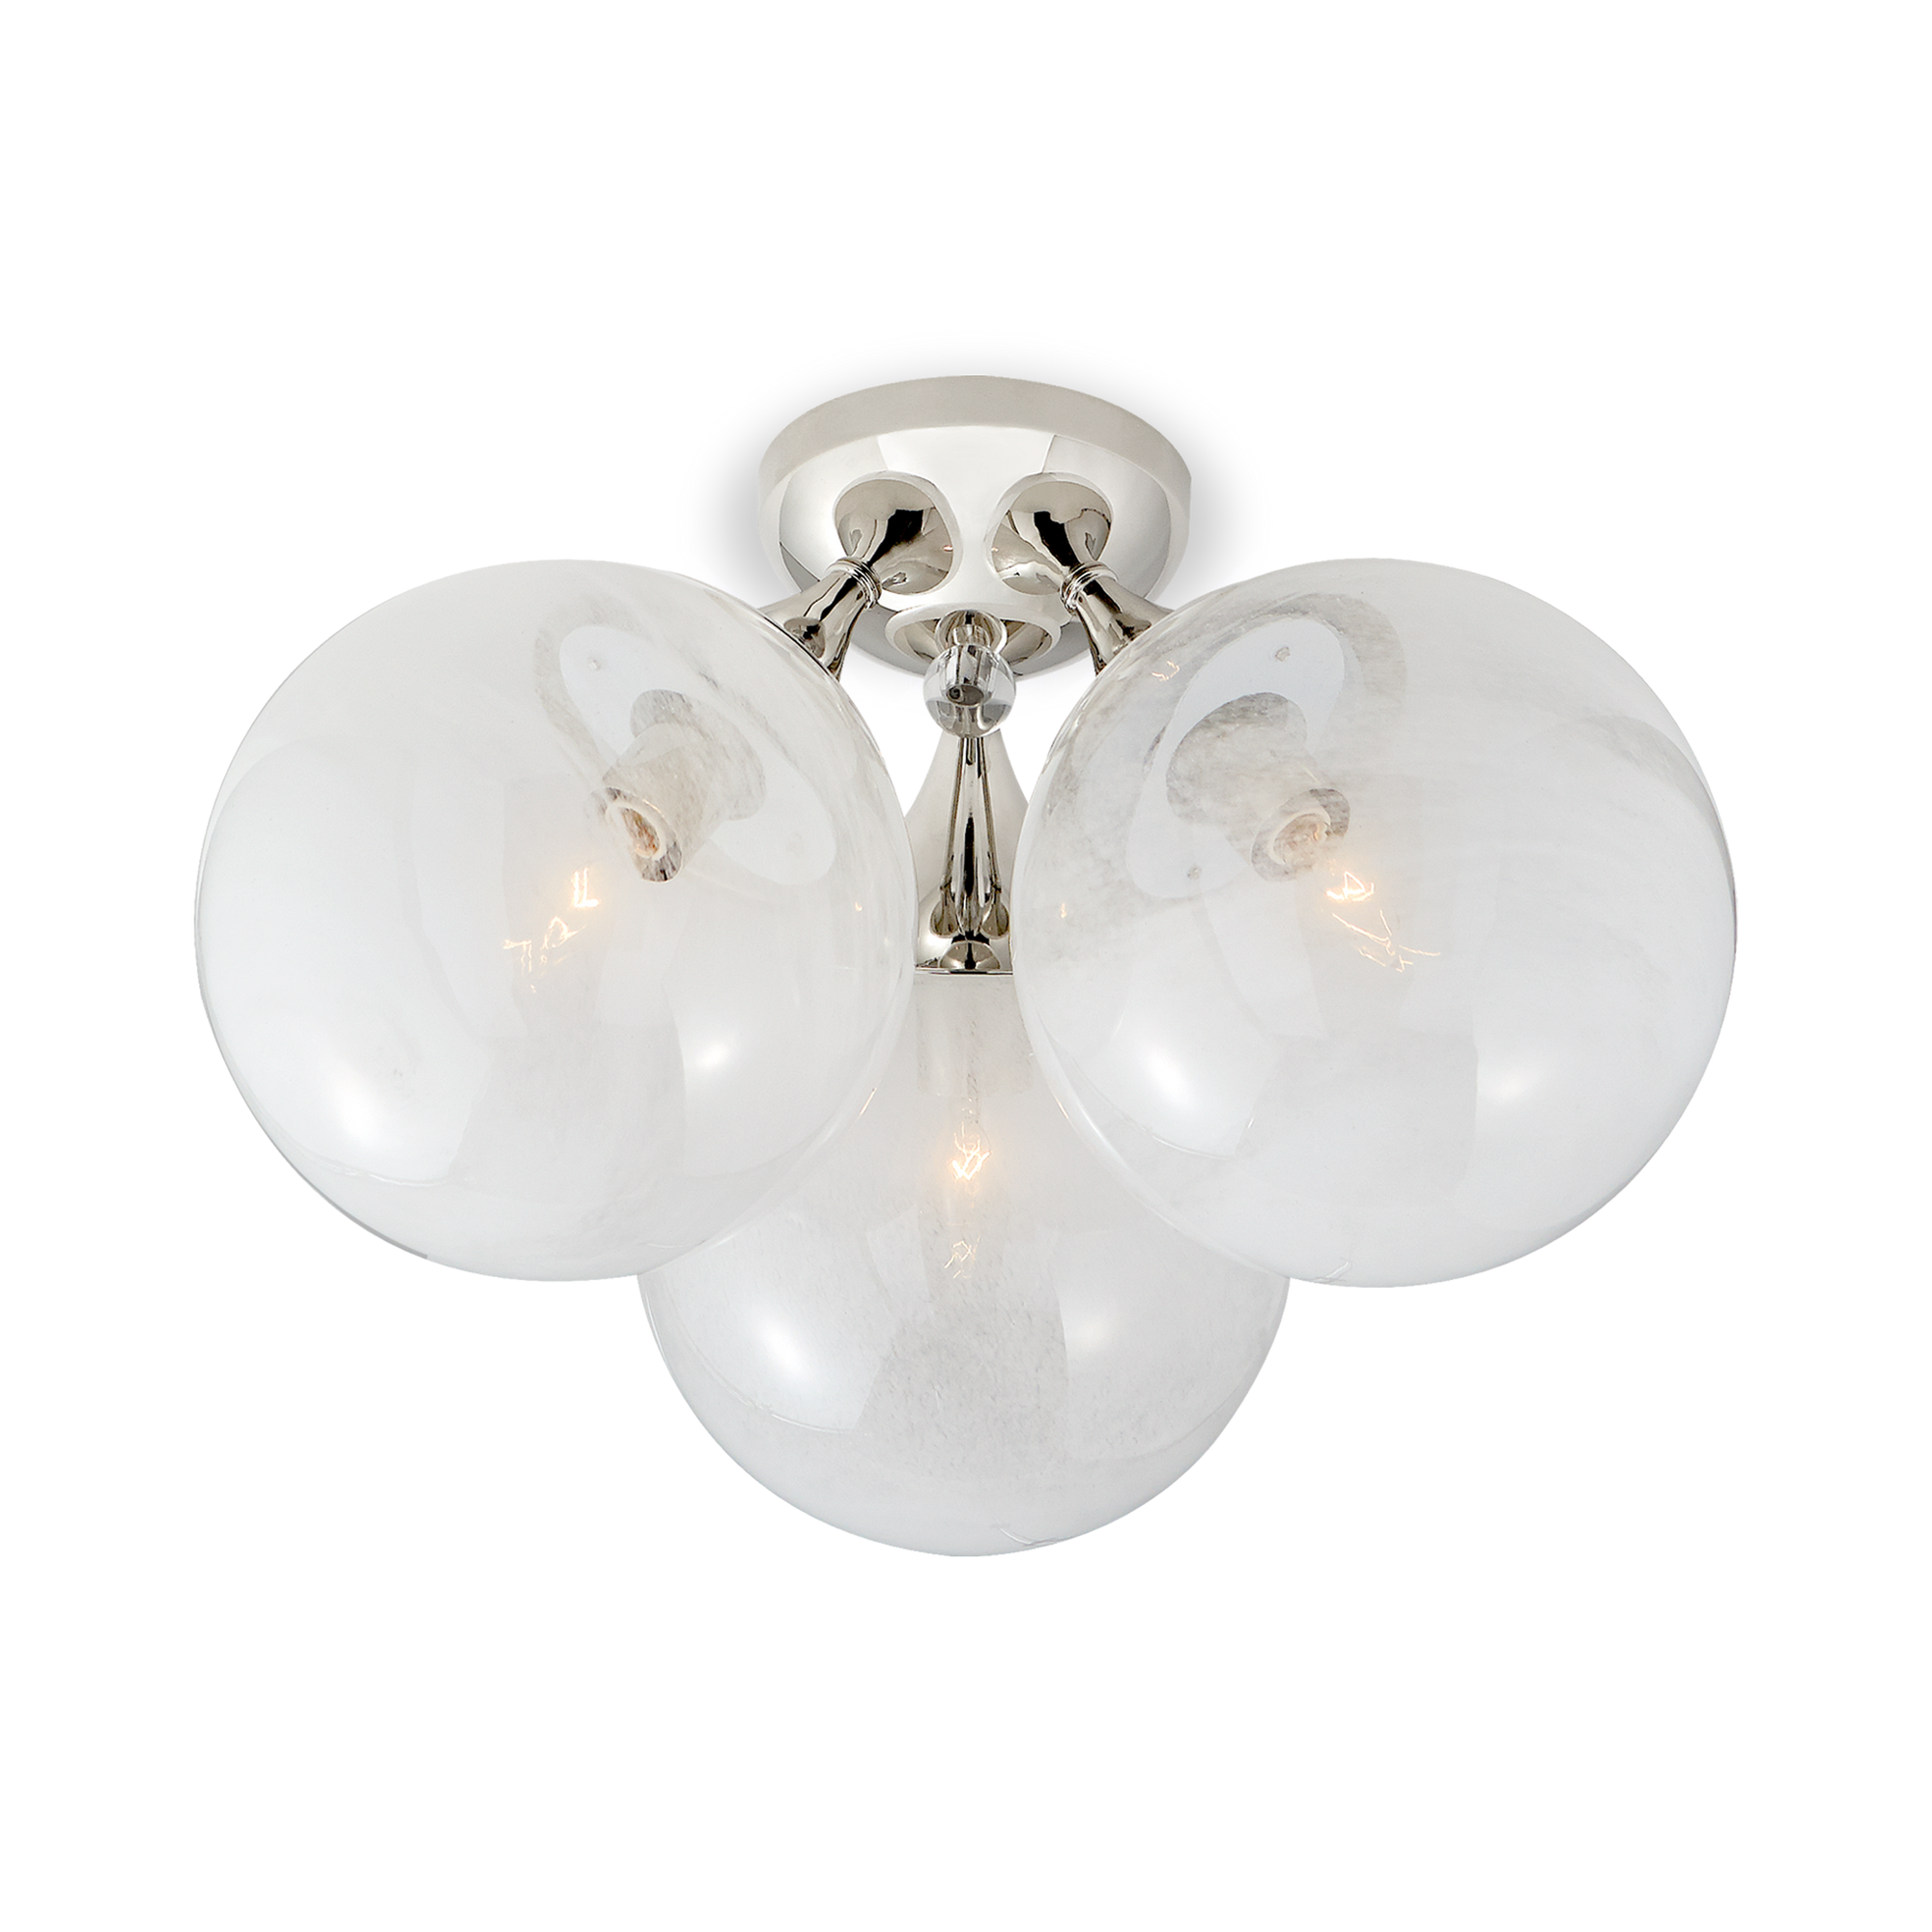 The Cristol Large Trip Flush Mount is inspired by old world glamour and European midcentury design.